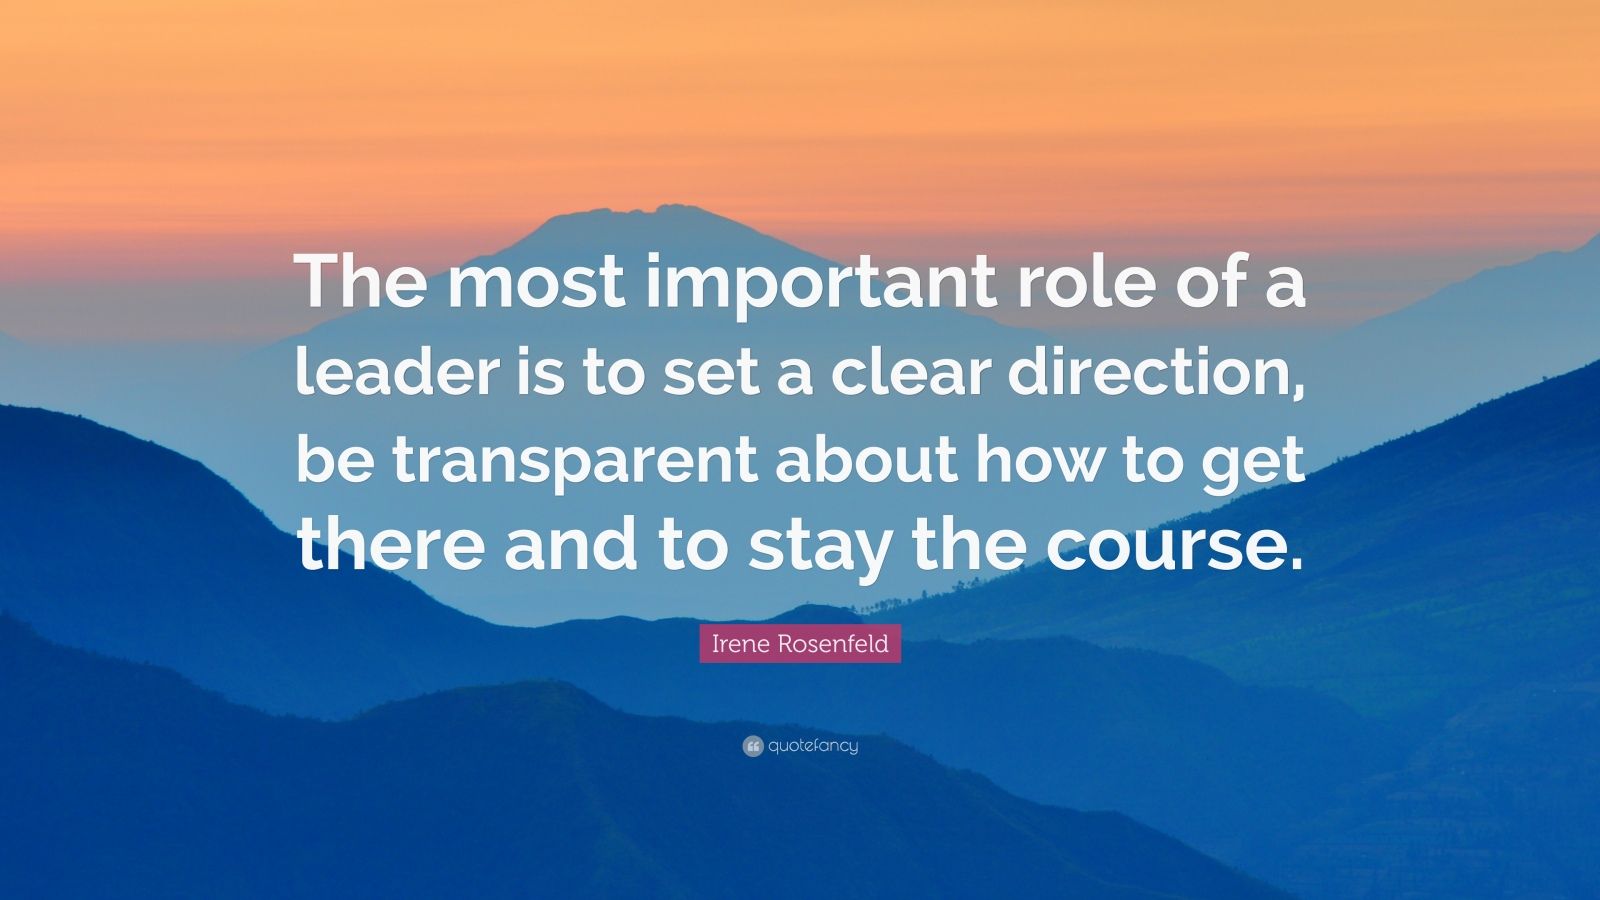 Irene Rosenfeld Quote: “The most important role of a leader is to set a